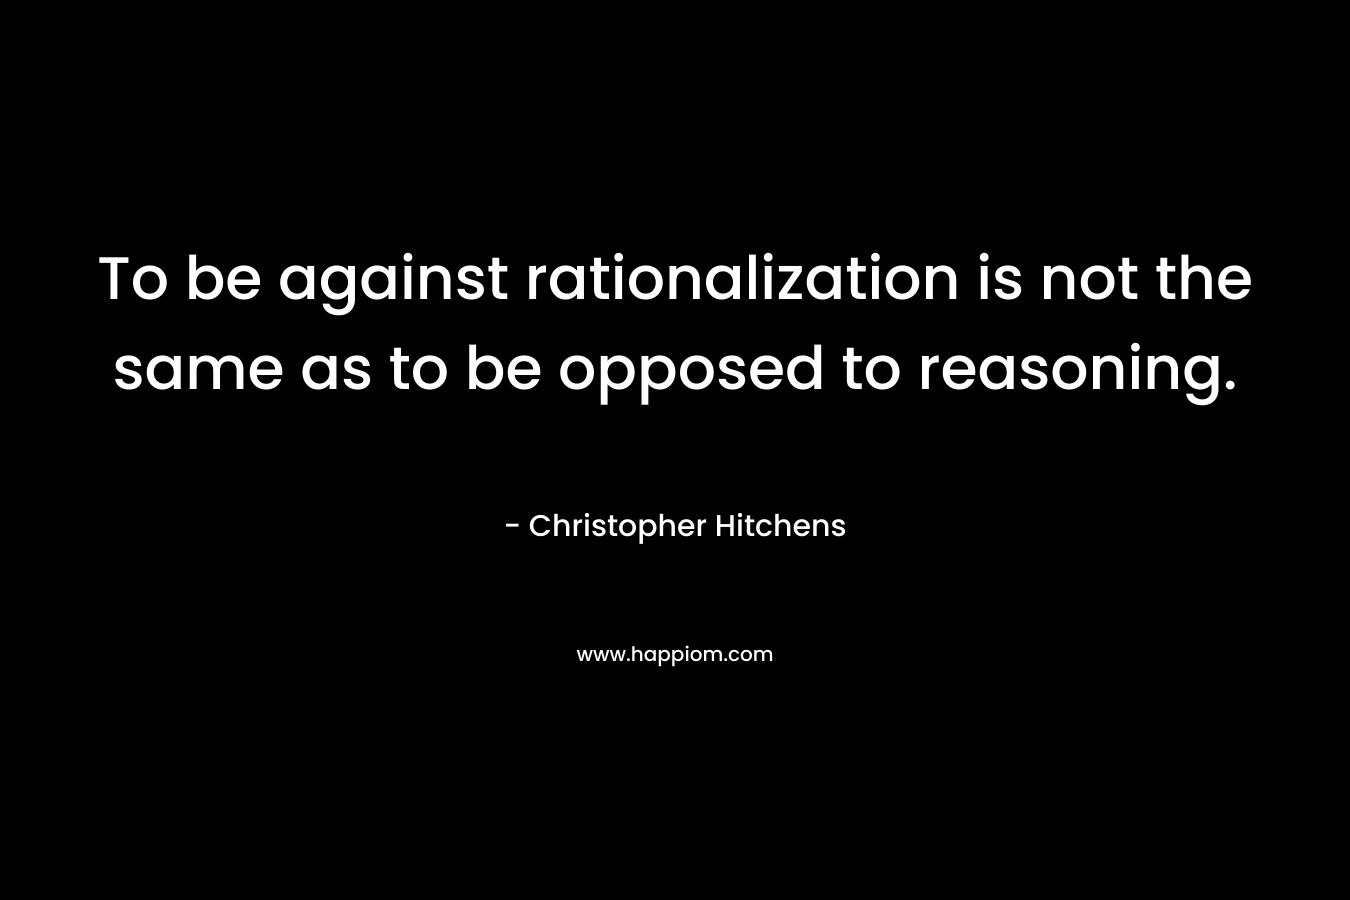 To be against rationalization is not the same as to be opposed to reasoning.